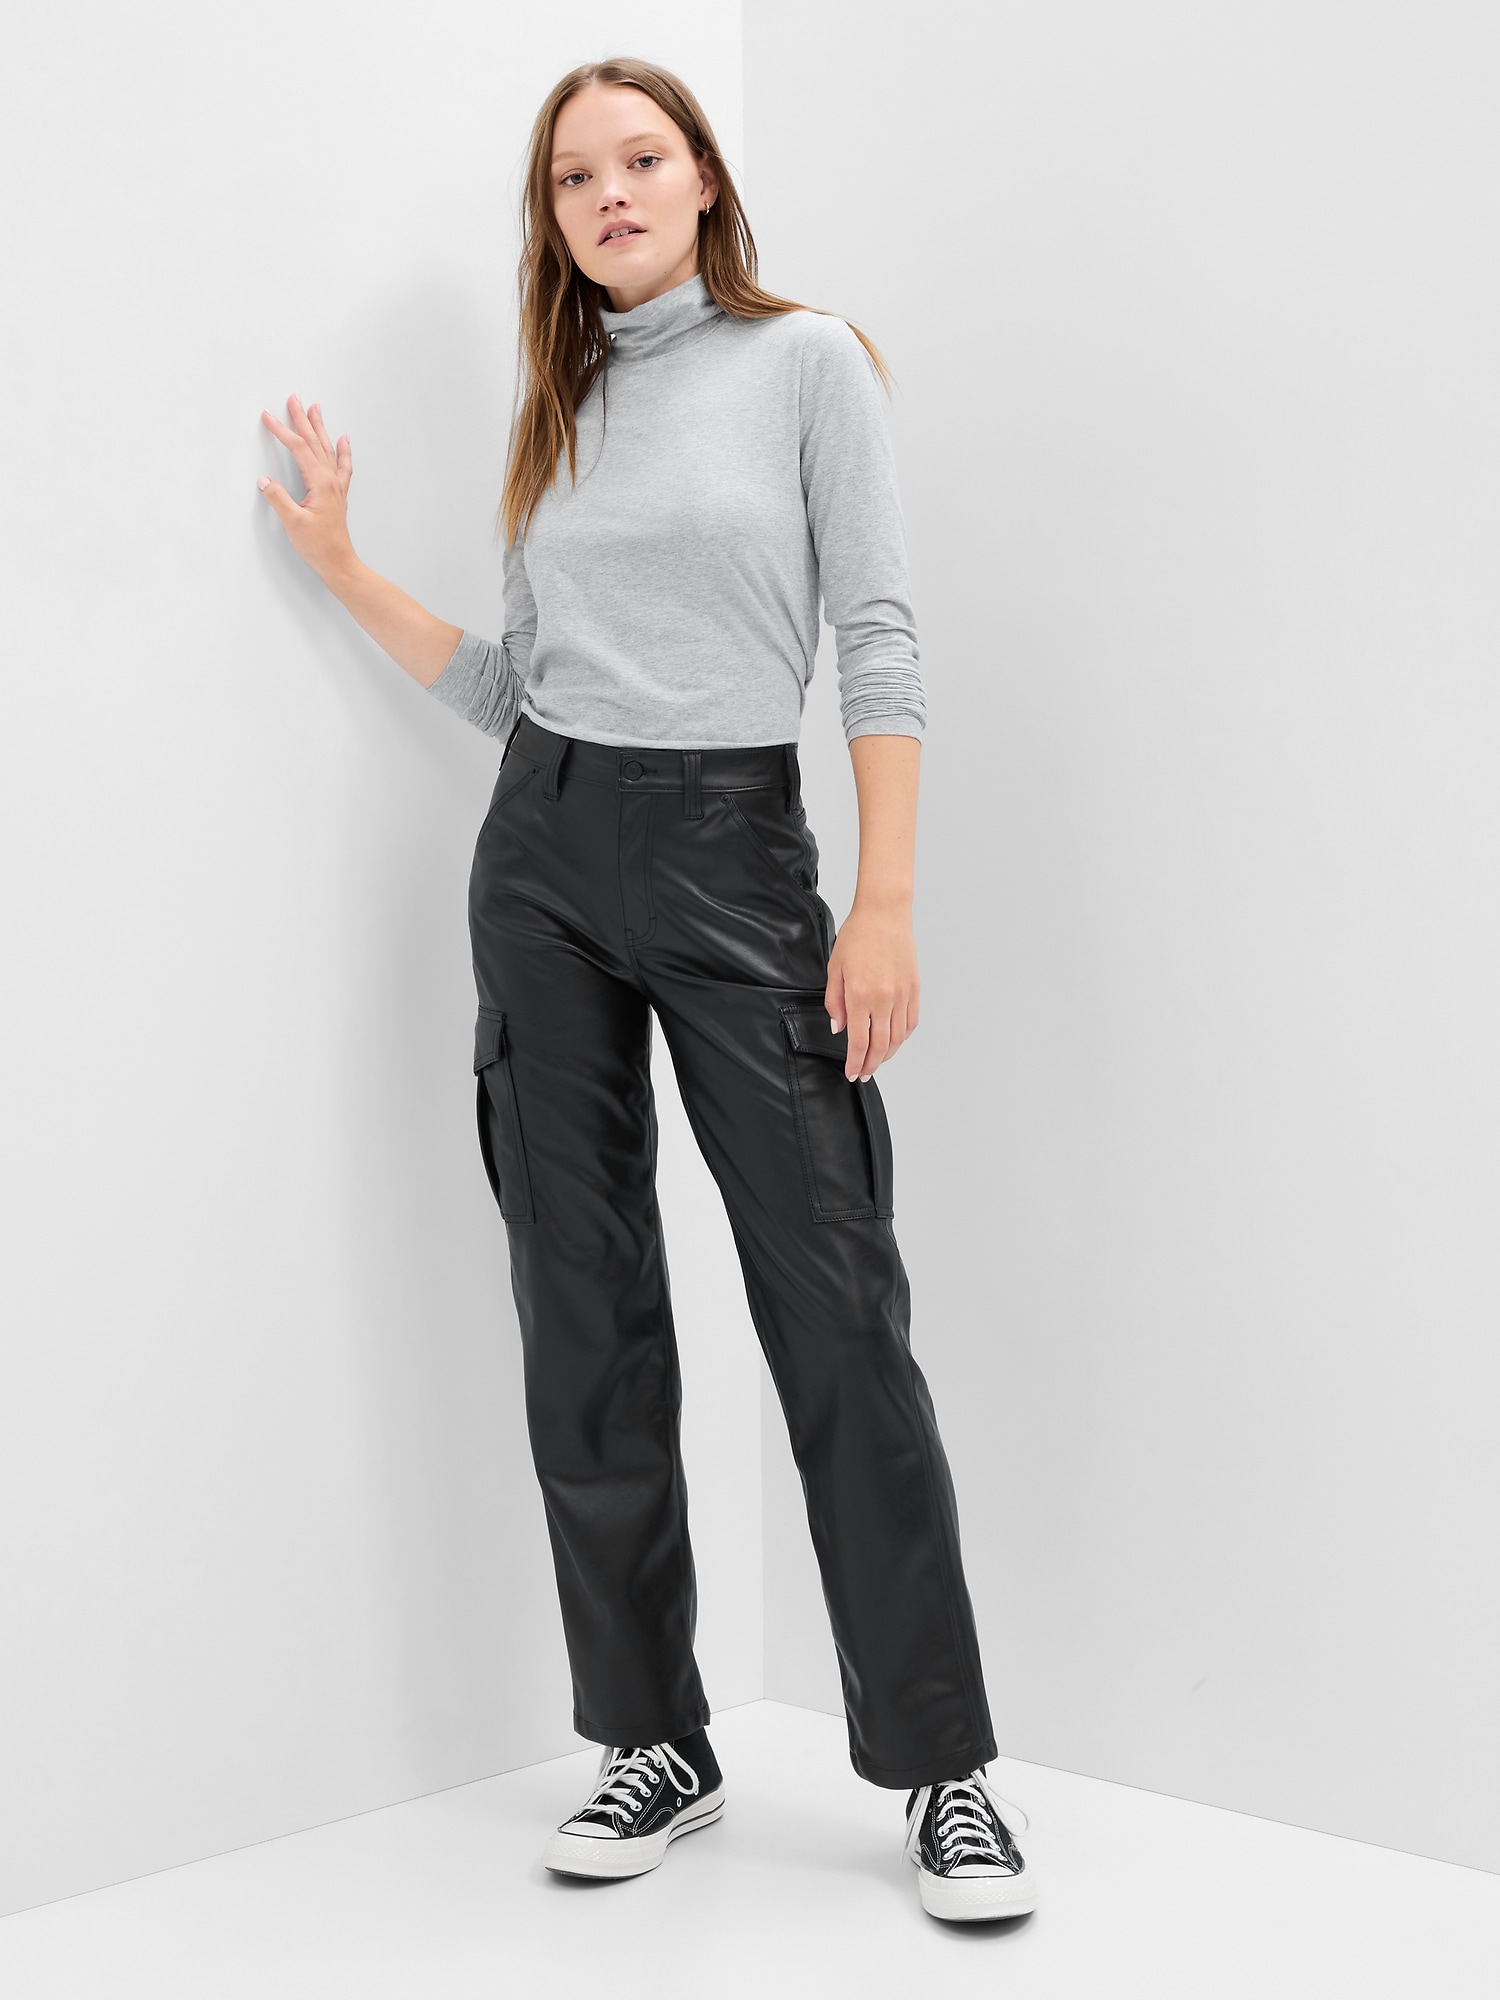 Retro Straight High Waist Loose Cargo Pants Womens Casual, Loose, Slimming,  Y2K Street Style With Wide Leg Style 230506 From Mu03, $13.26 | DHgate.Com